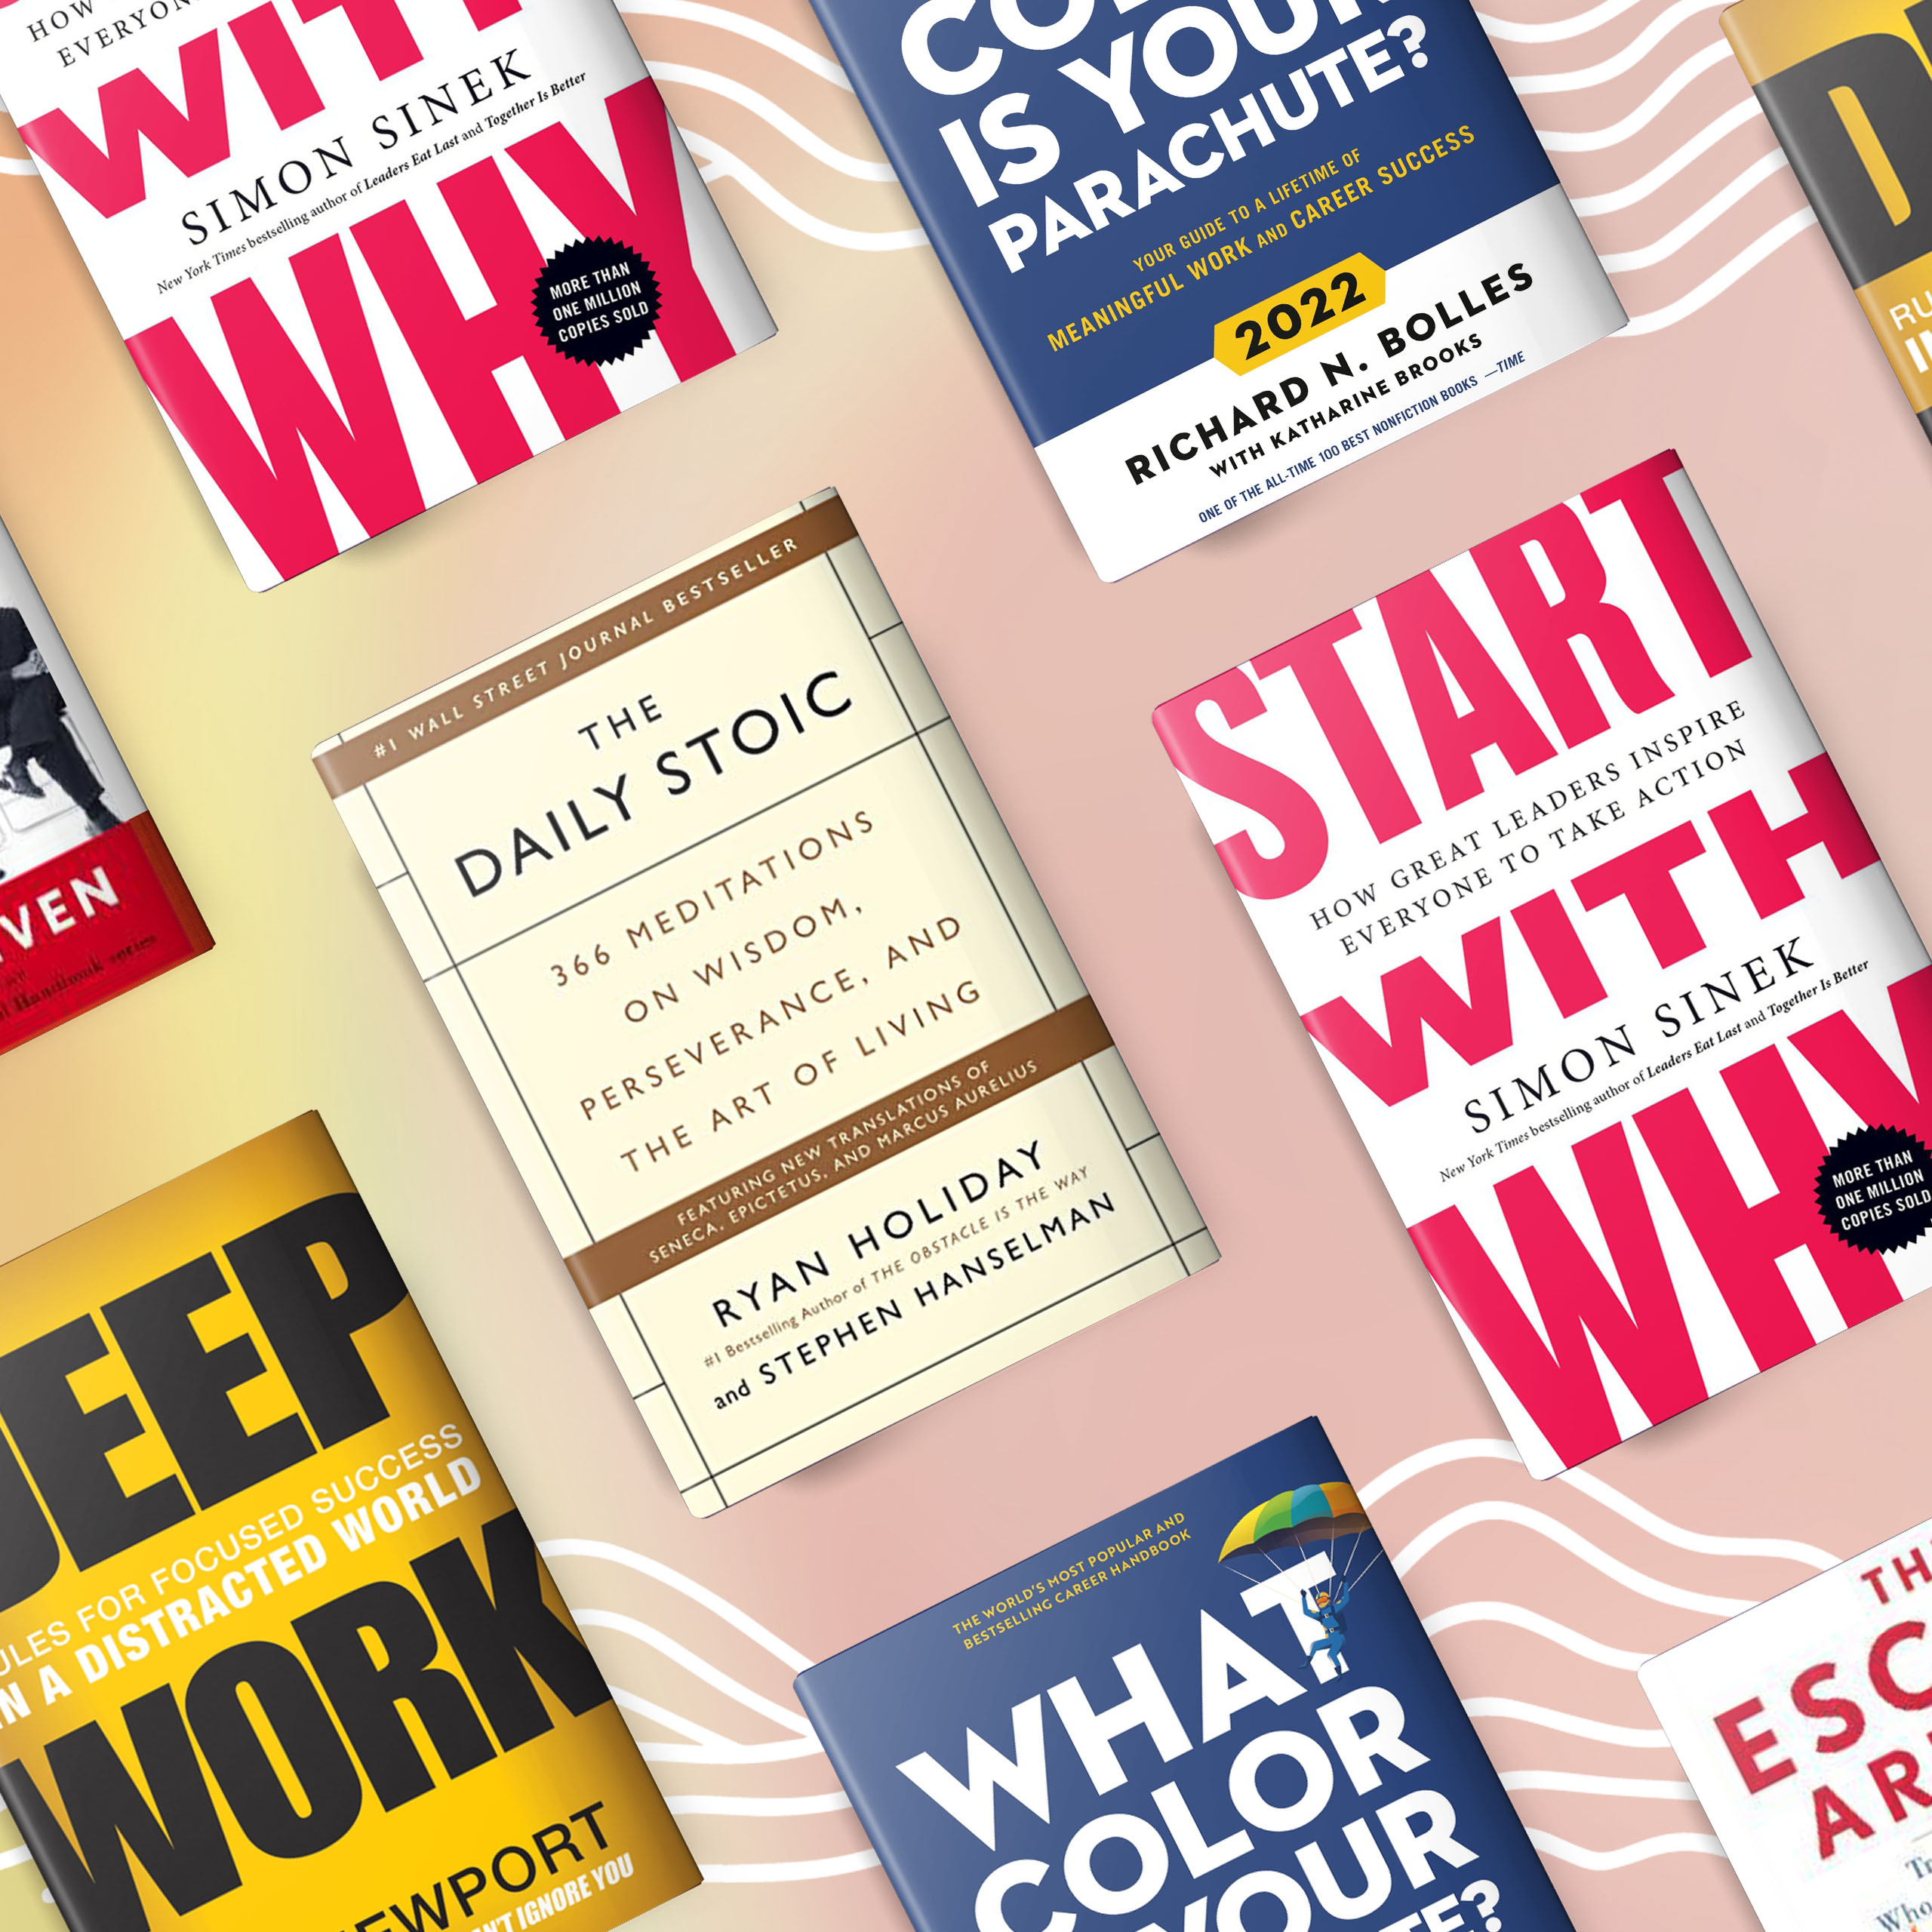 5 Books to Read Before Your Next Career Move